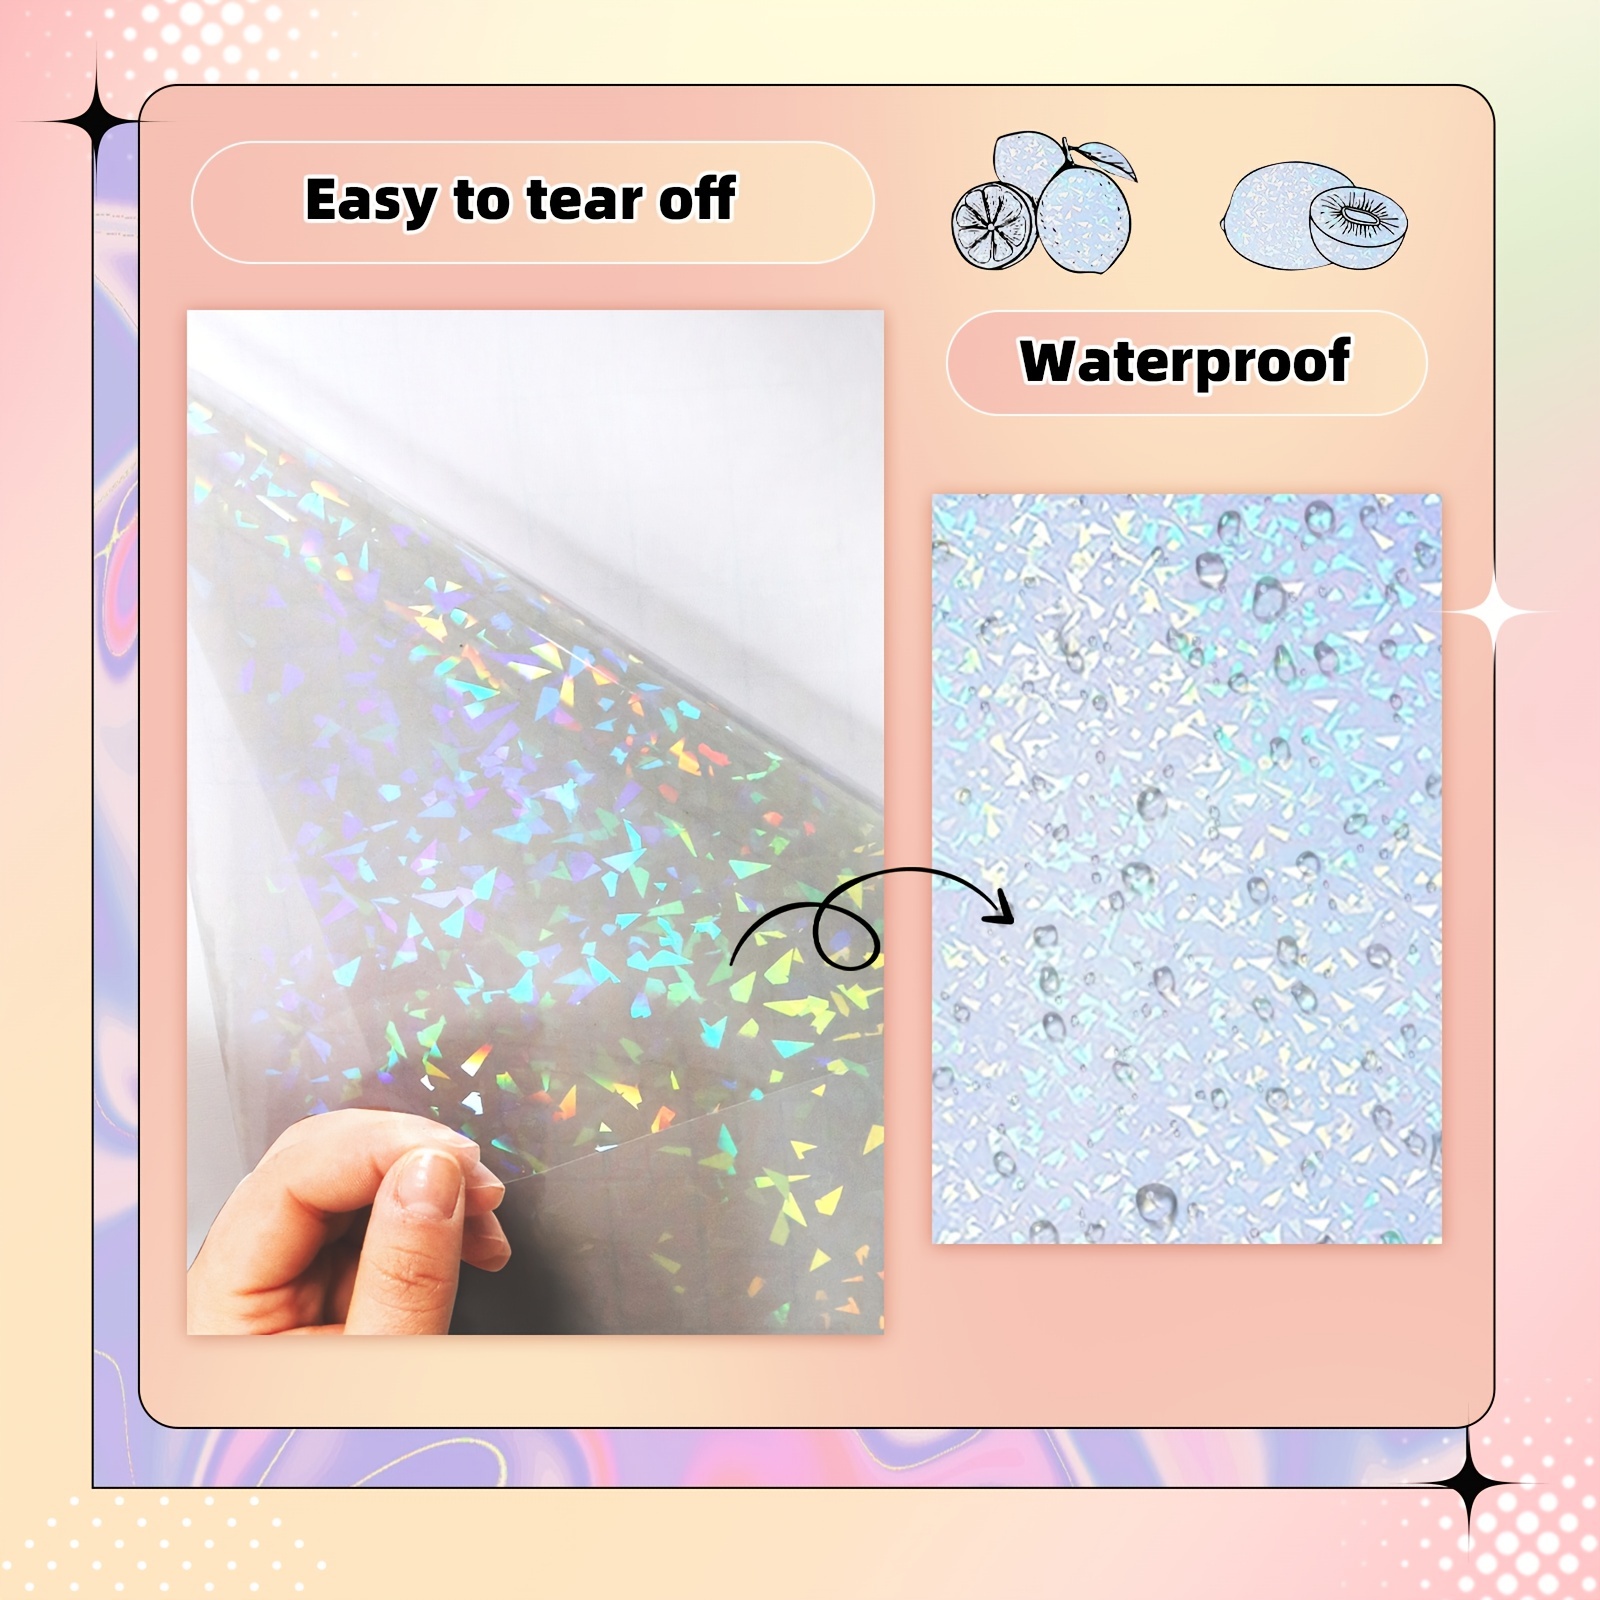 10 X A4 Sheets Stars Holographic Laminate Self Adhesive Vinyl Overlay  Sheets Cold Lamination Art Craft Projects 11.7 X 8.3 